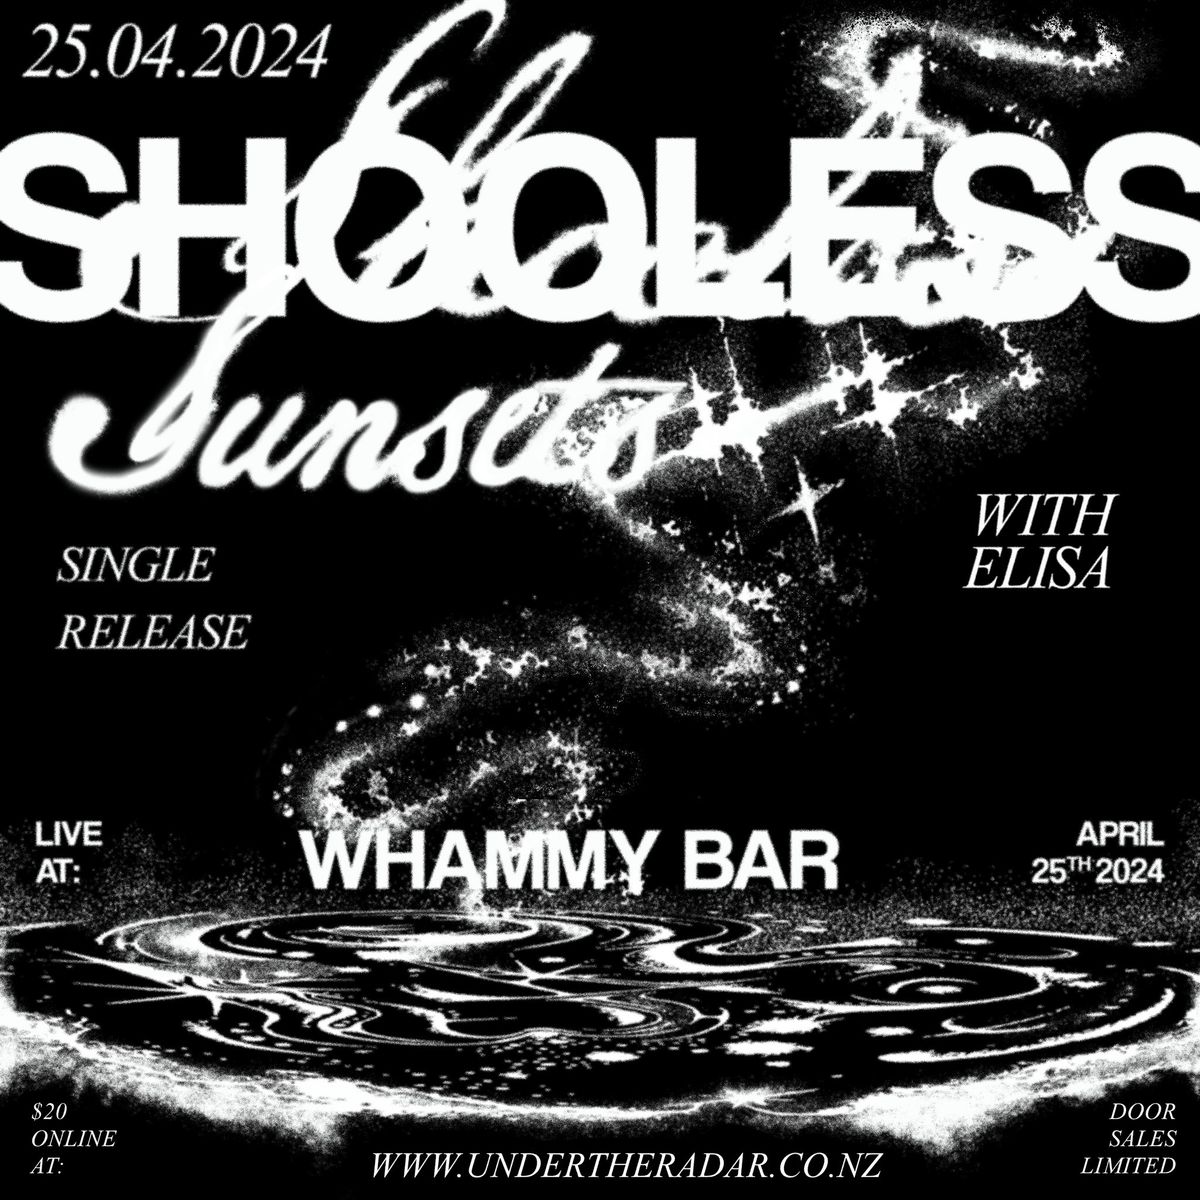 Shooless 'Sunsets' Single Release Show